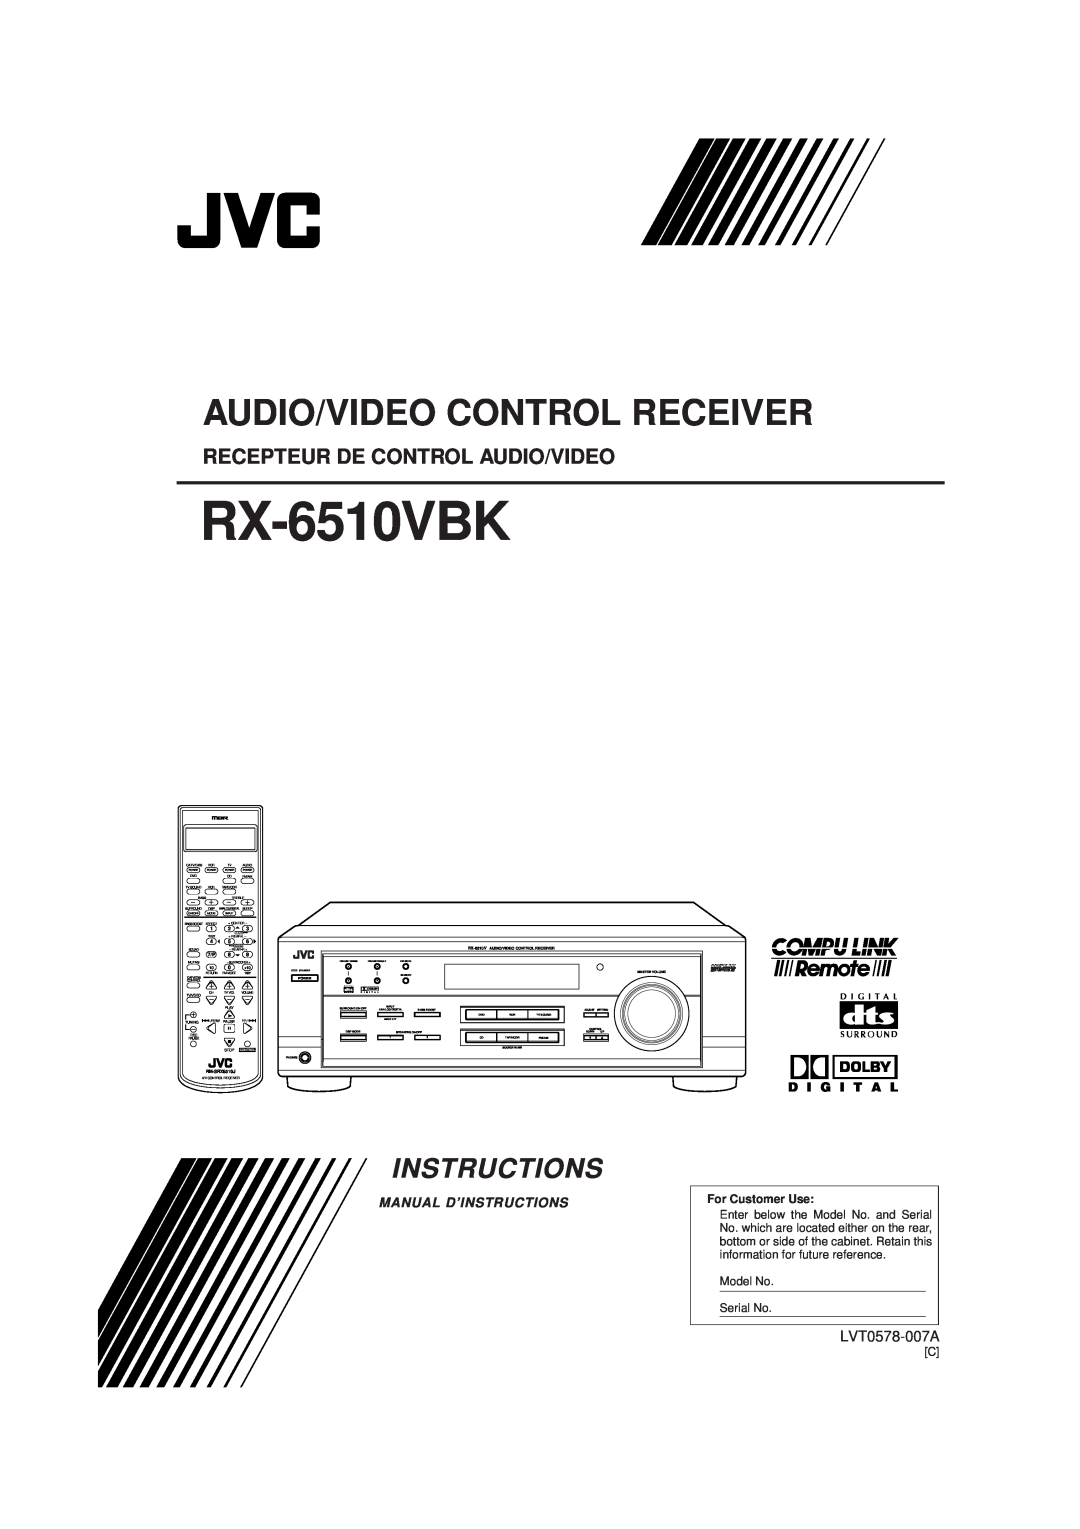 JVC RX-6510VBK manual LVT0578-007A, D I G I T A L, Manual D’Instructions, Audio/Video Control Receiver, For Customer Use 